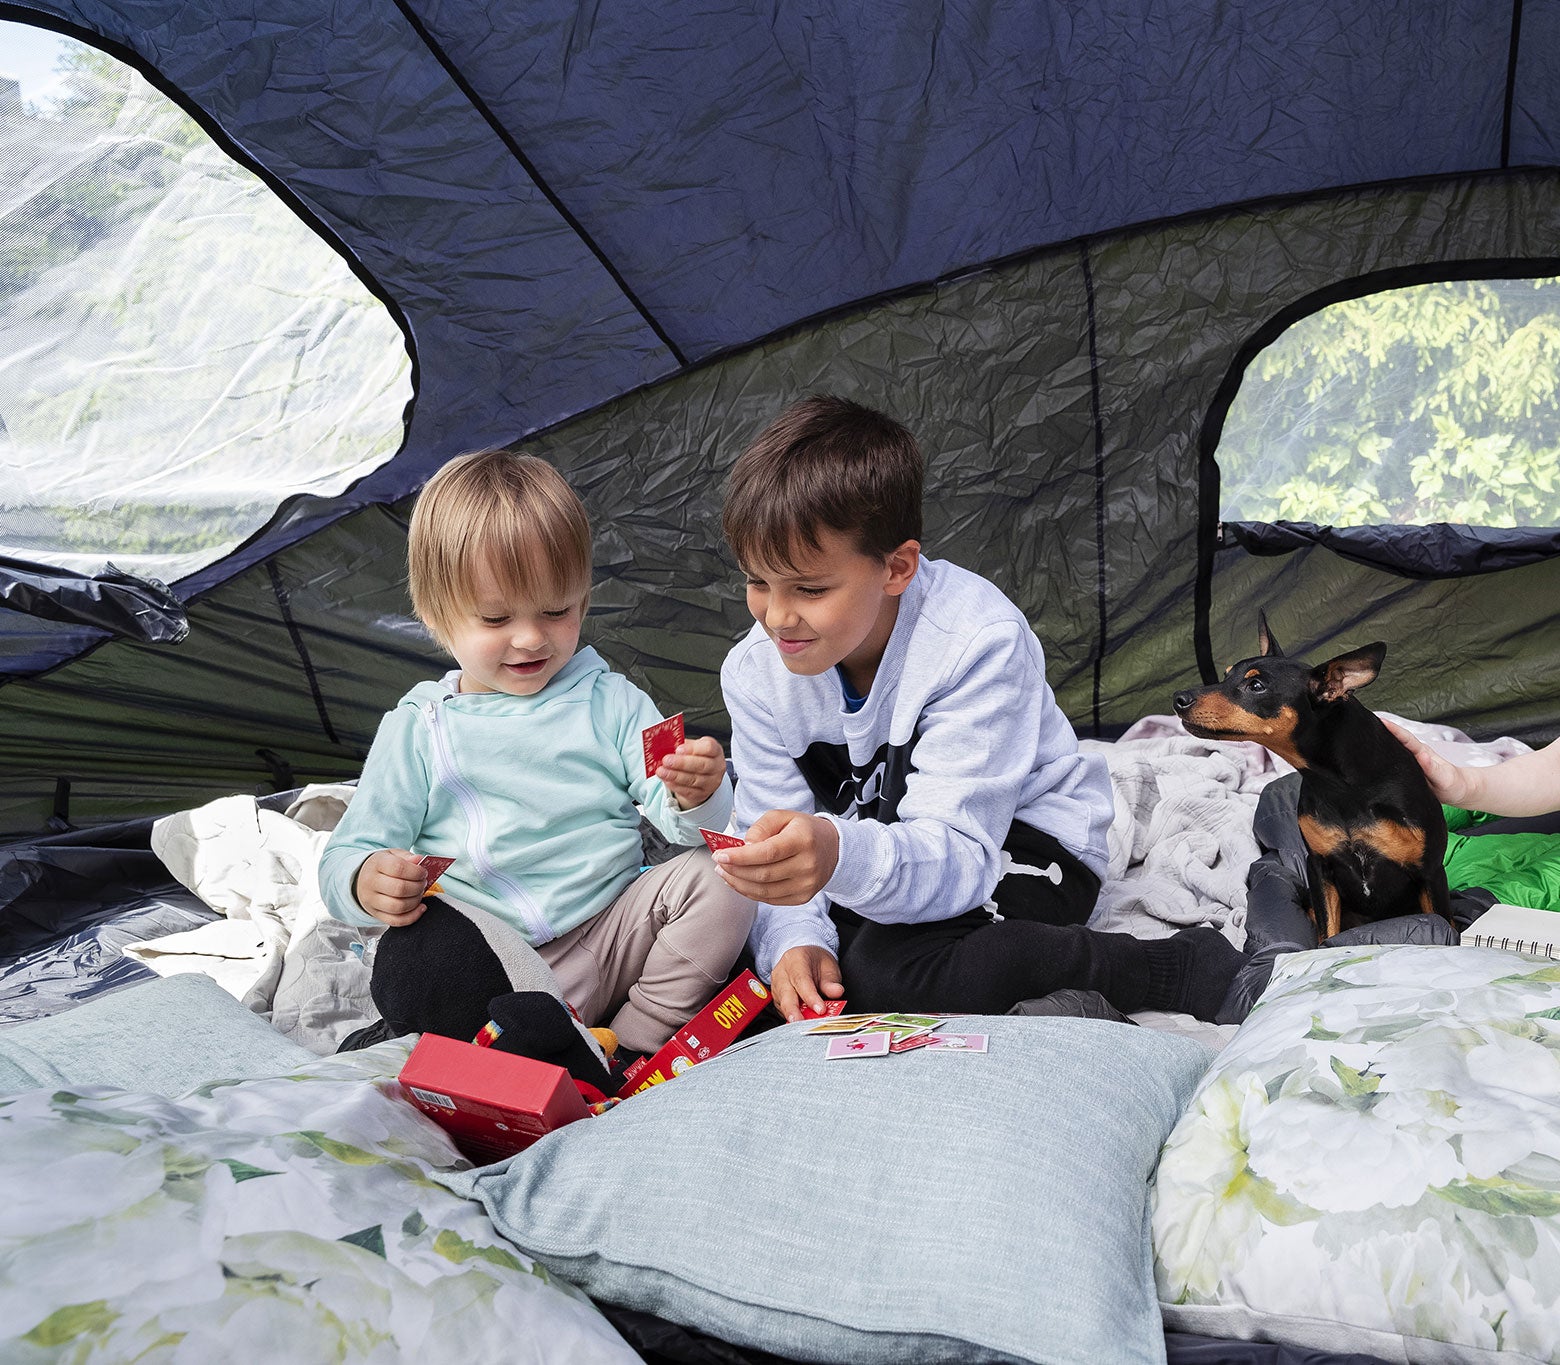 2 kids and a dog in an Acon Trampoline tent